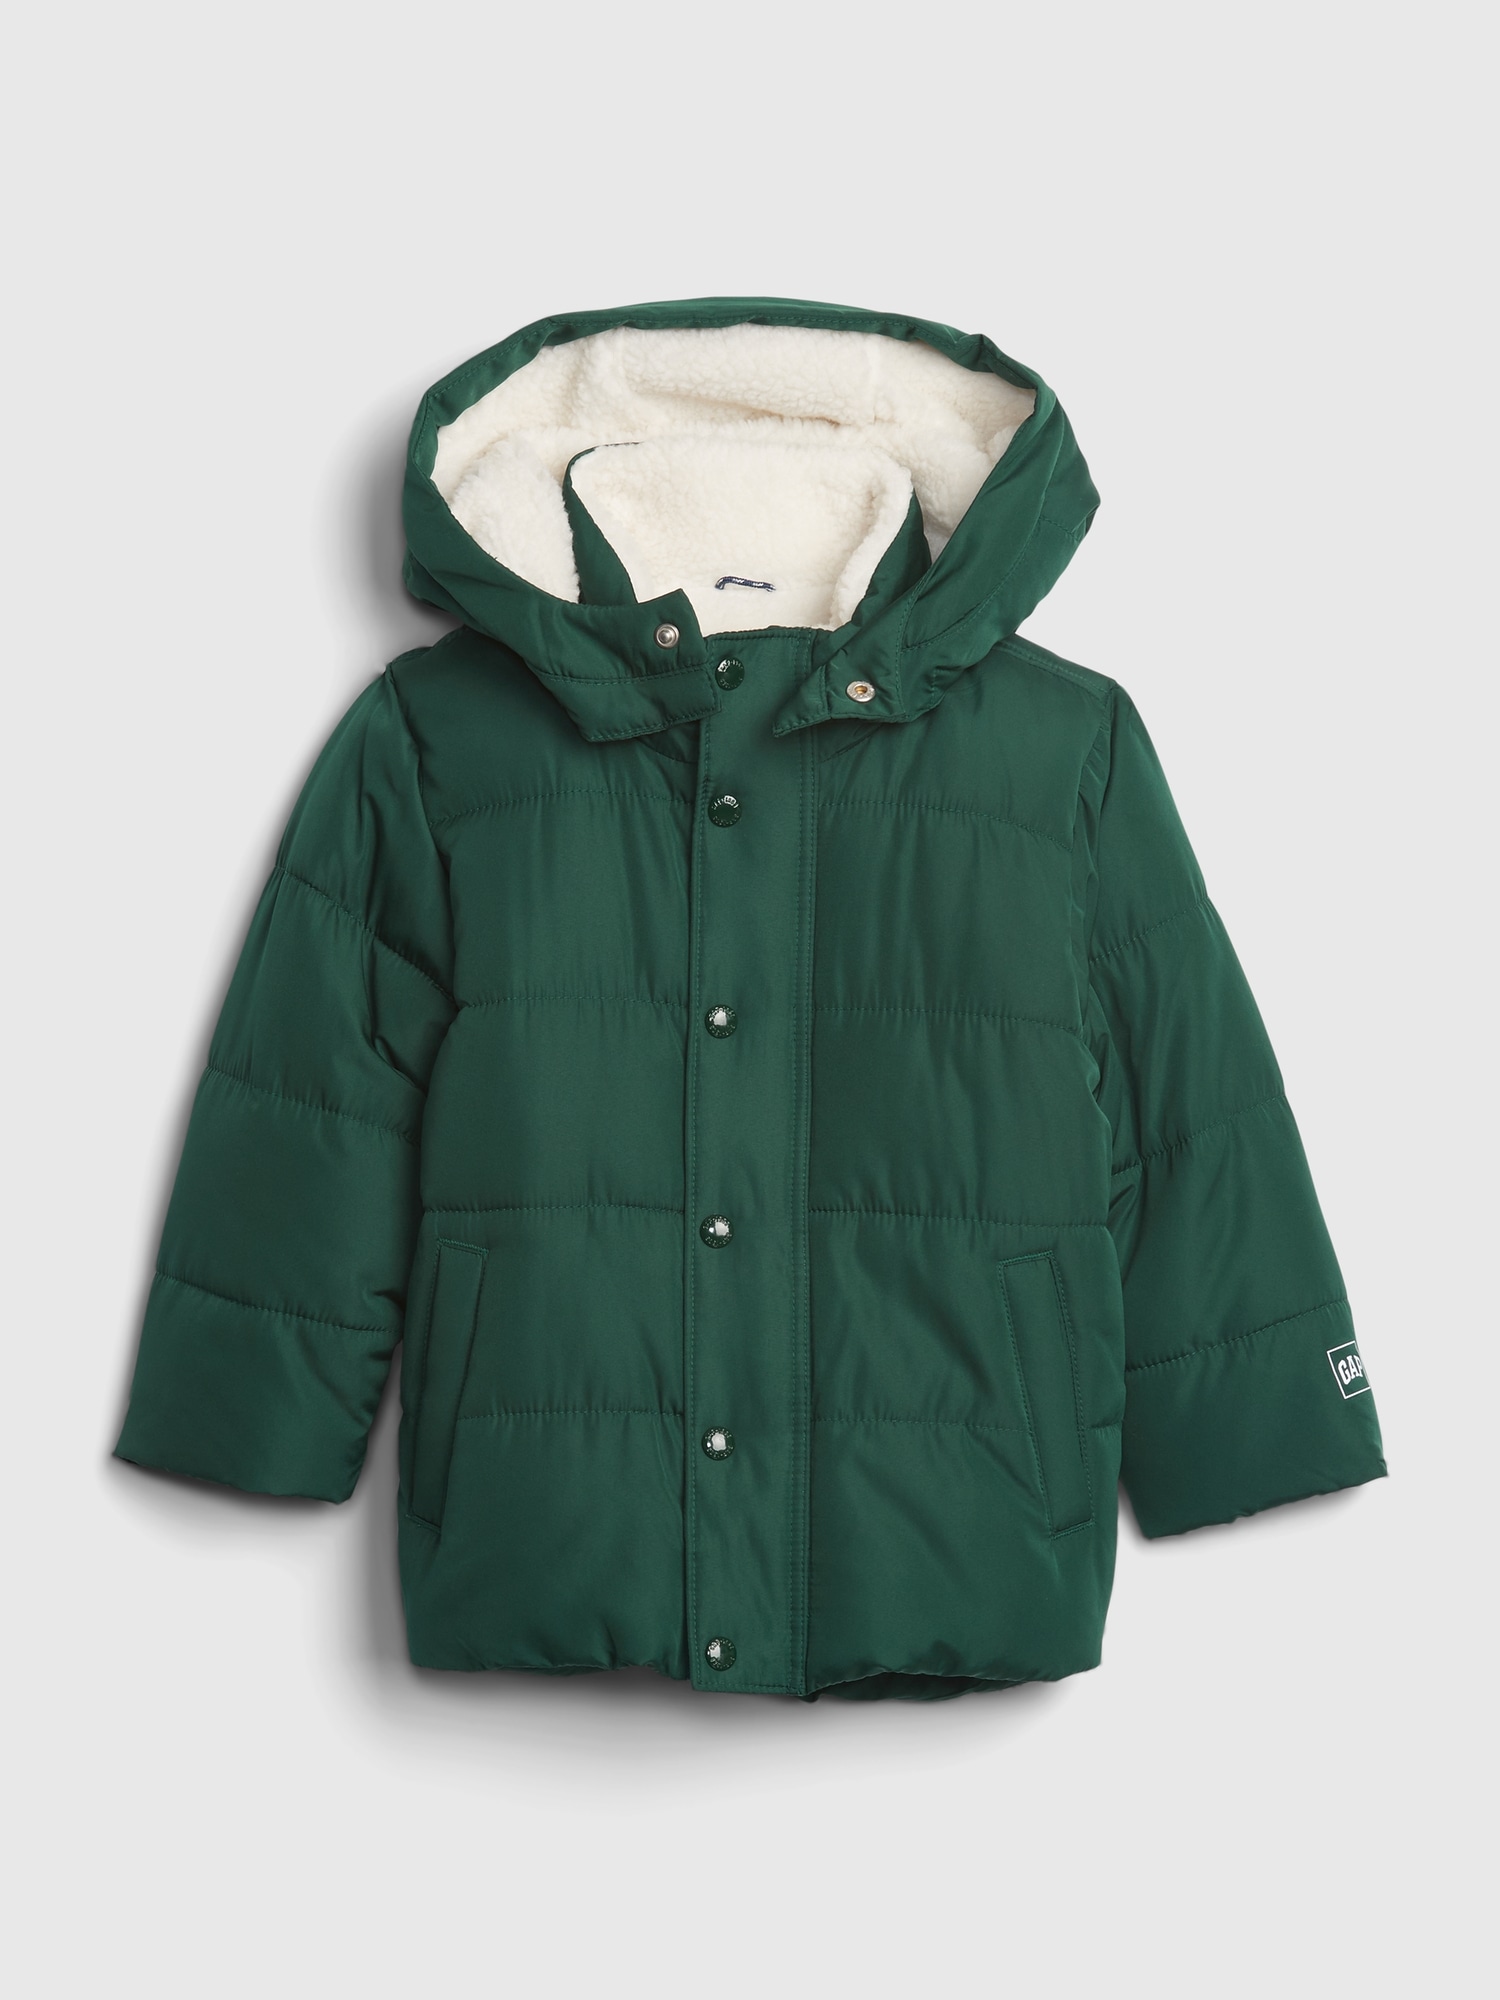 coldcontrol max puffer jacket